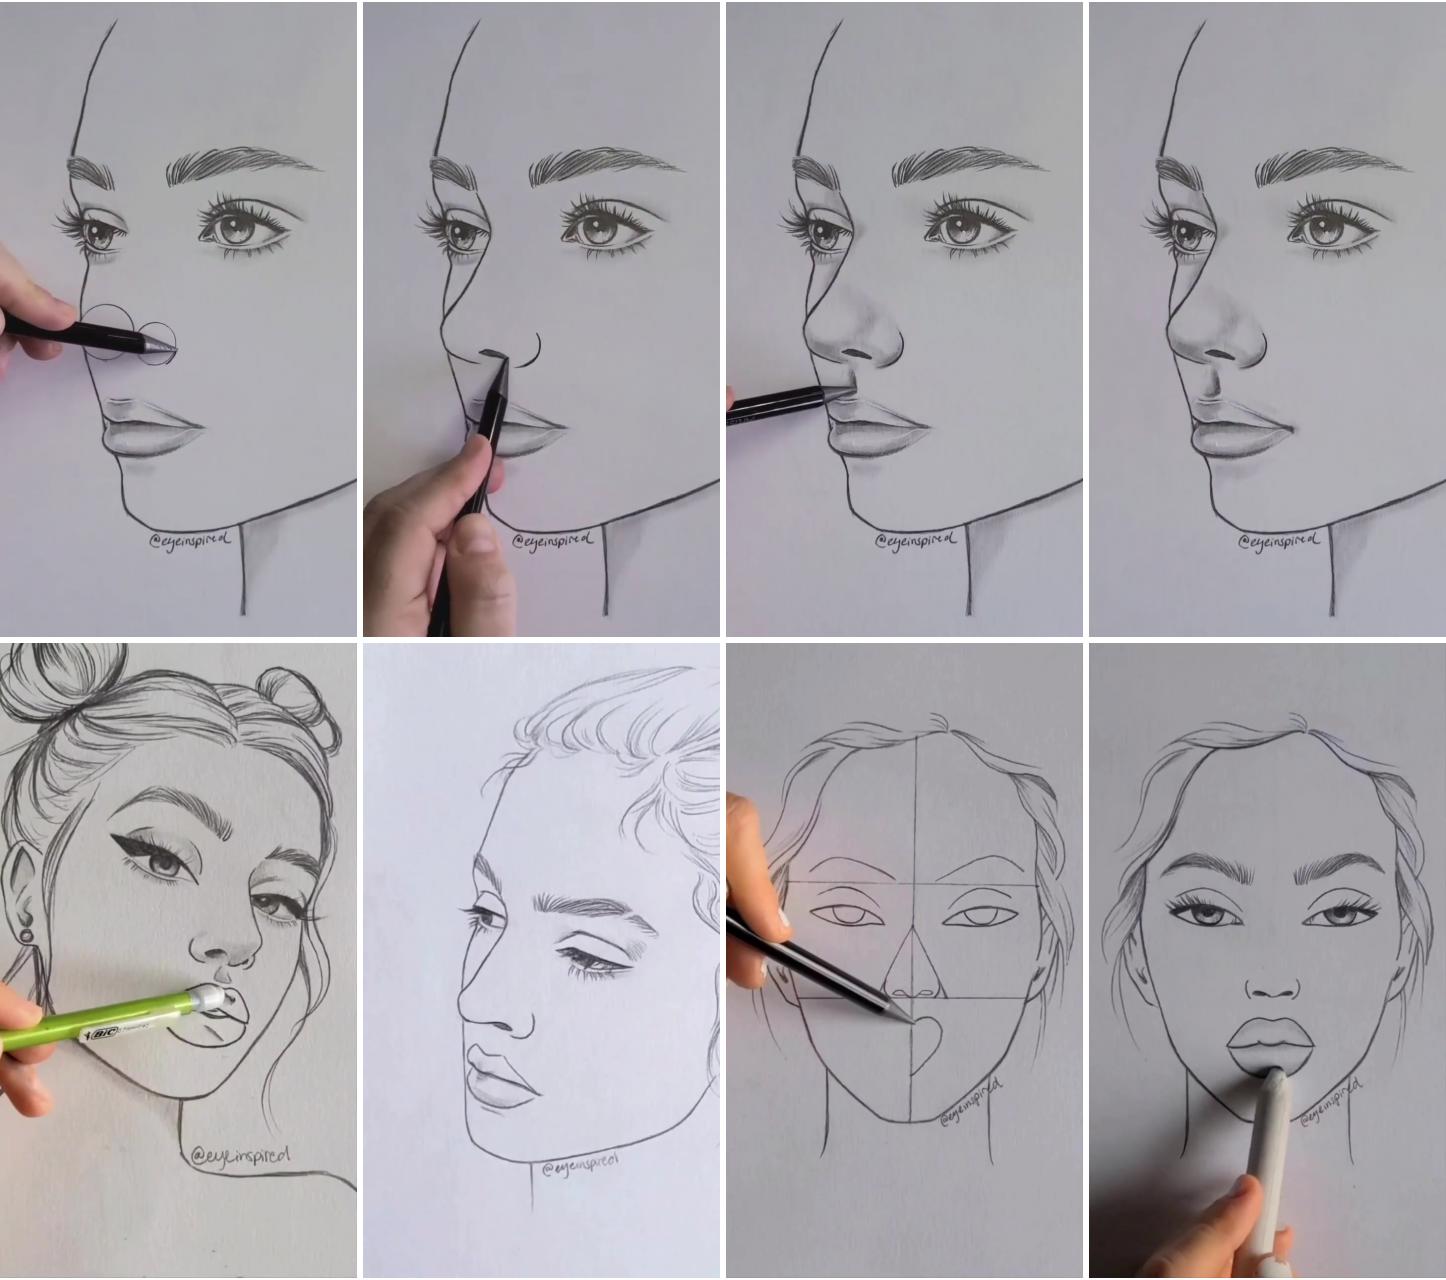 How to draw nose would you try art credit: eyeinspired | drawing like that is great